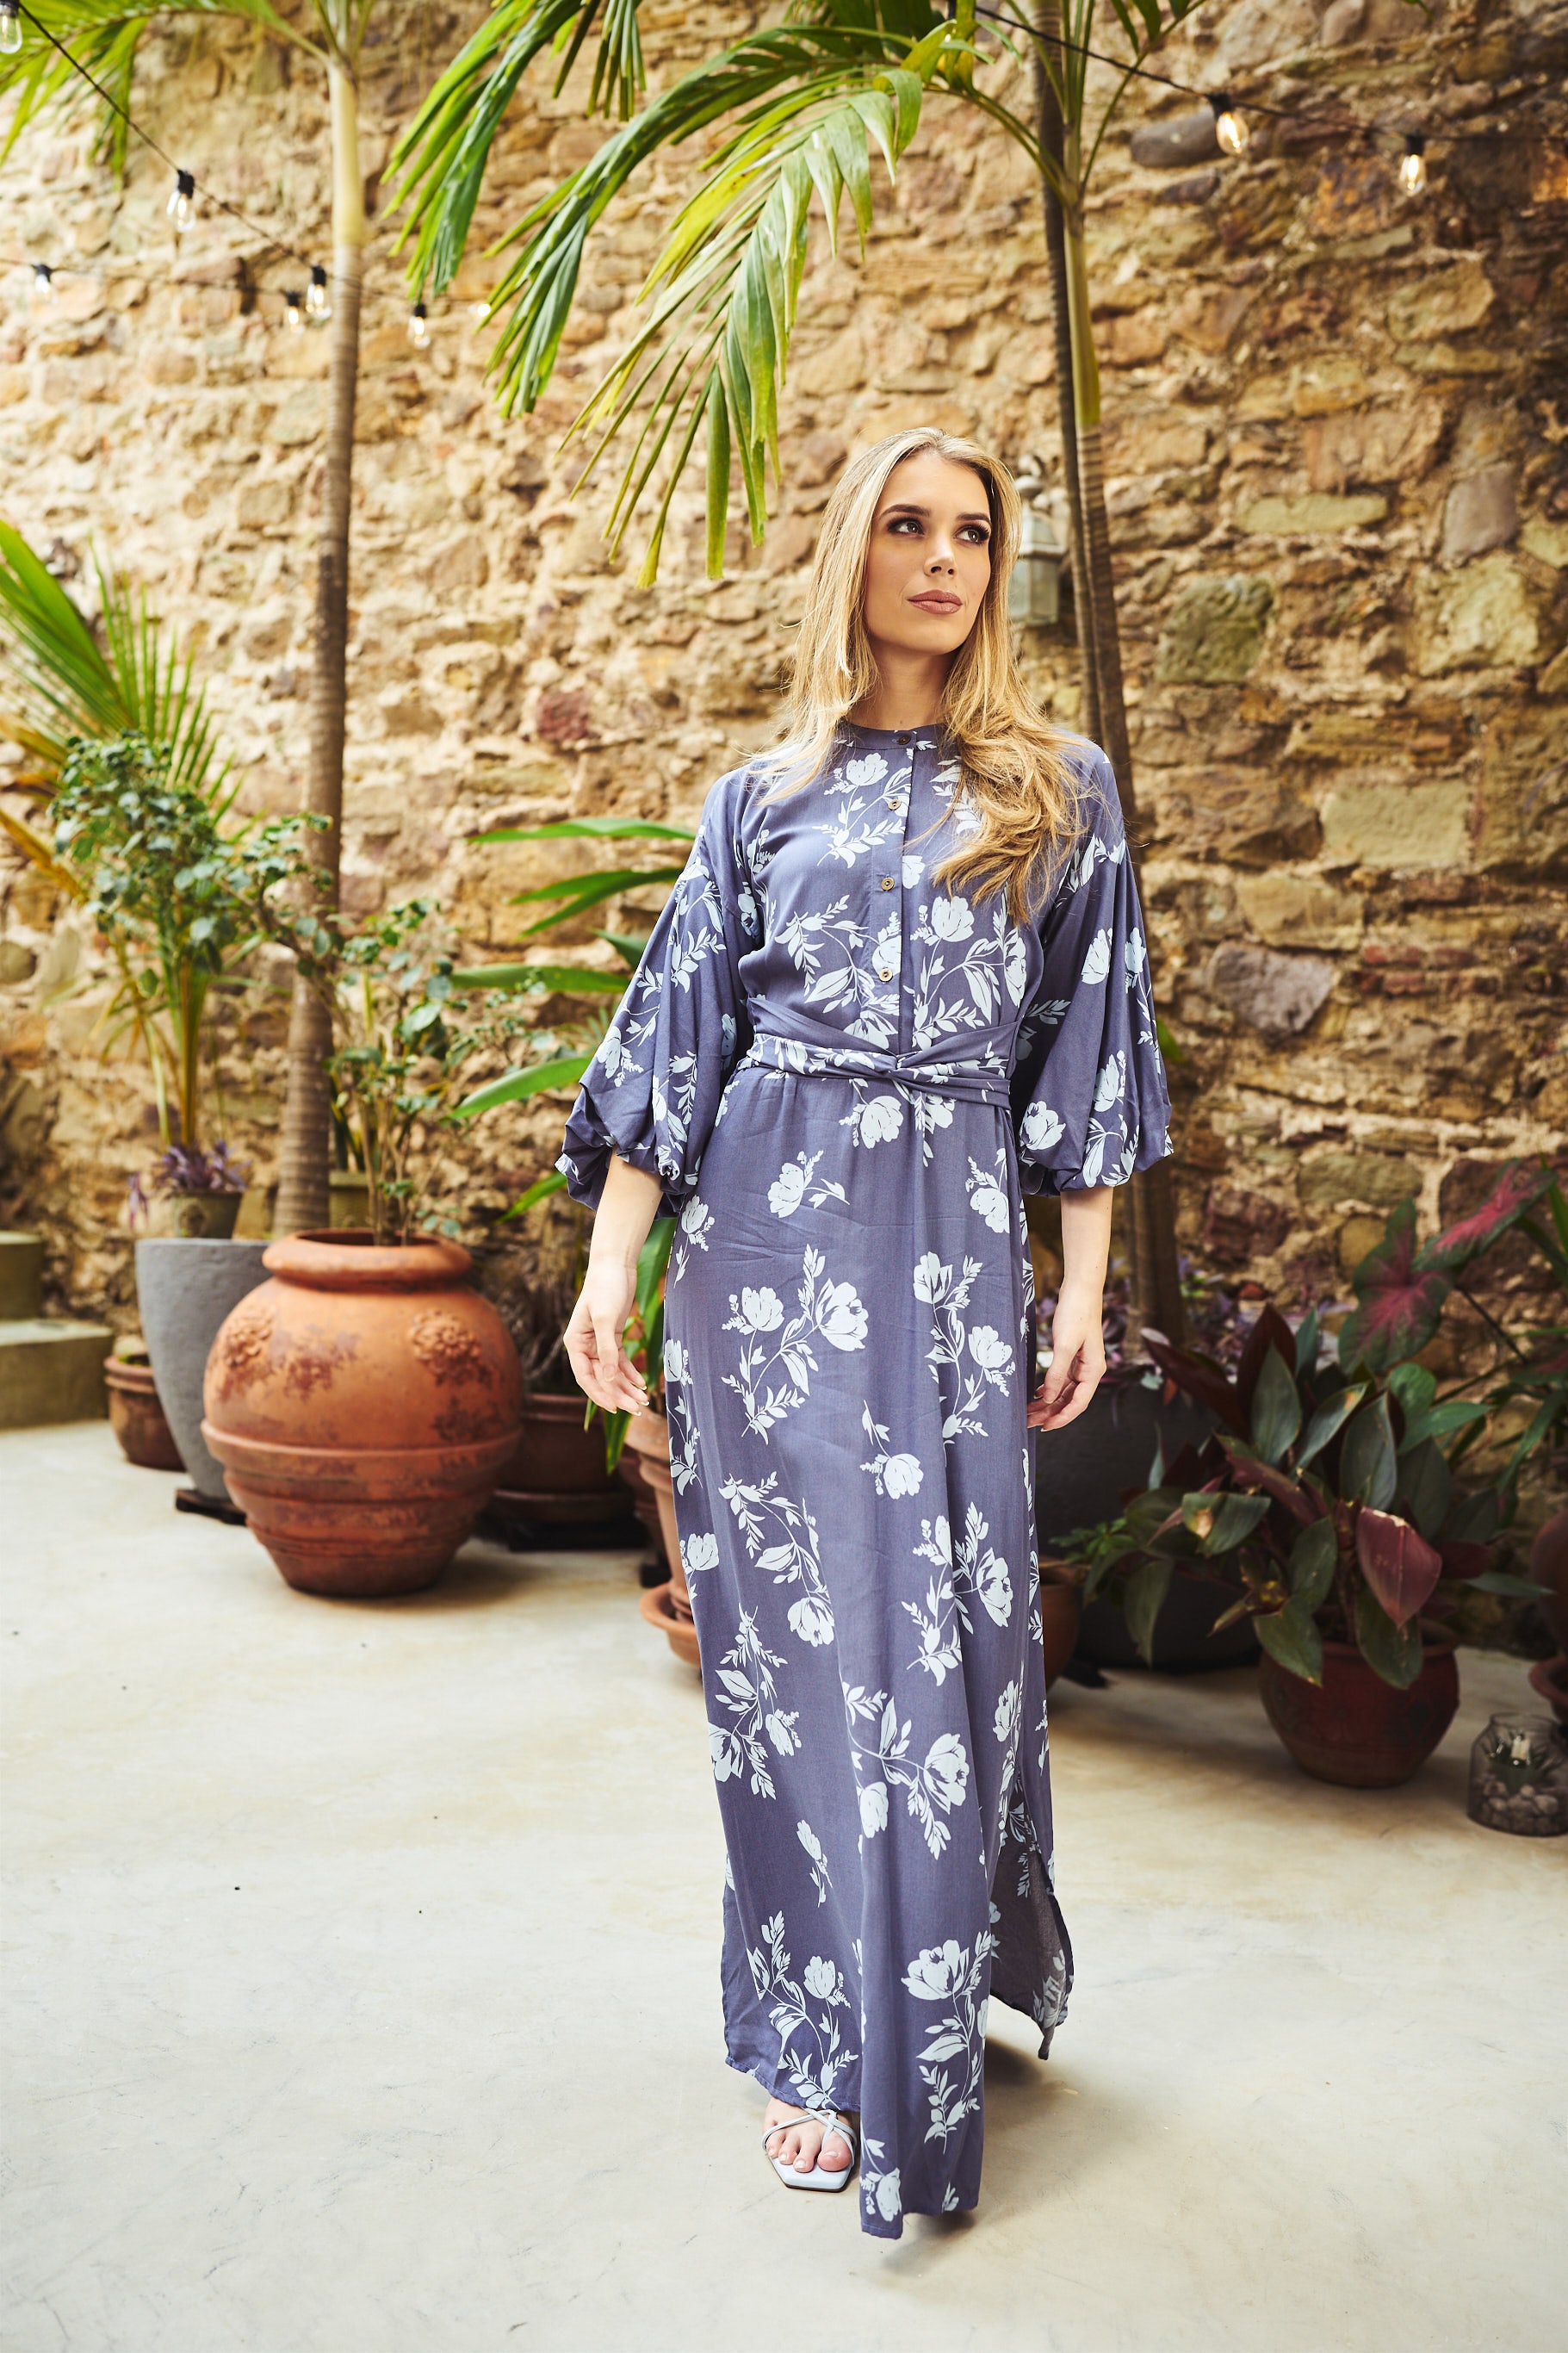 Knotted Maxi Dress - Flower Printed Cotton